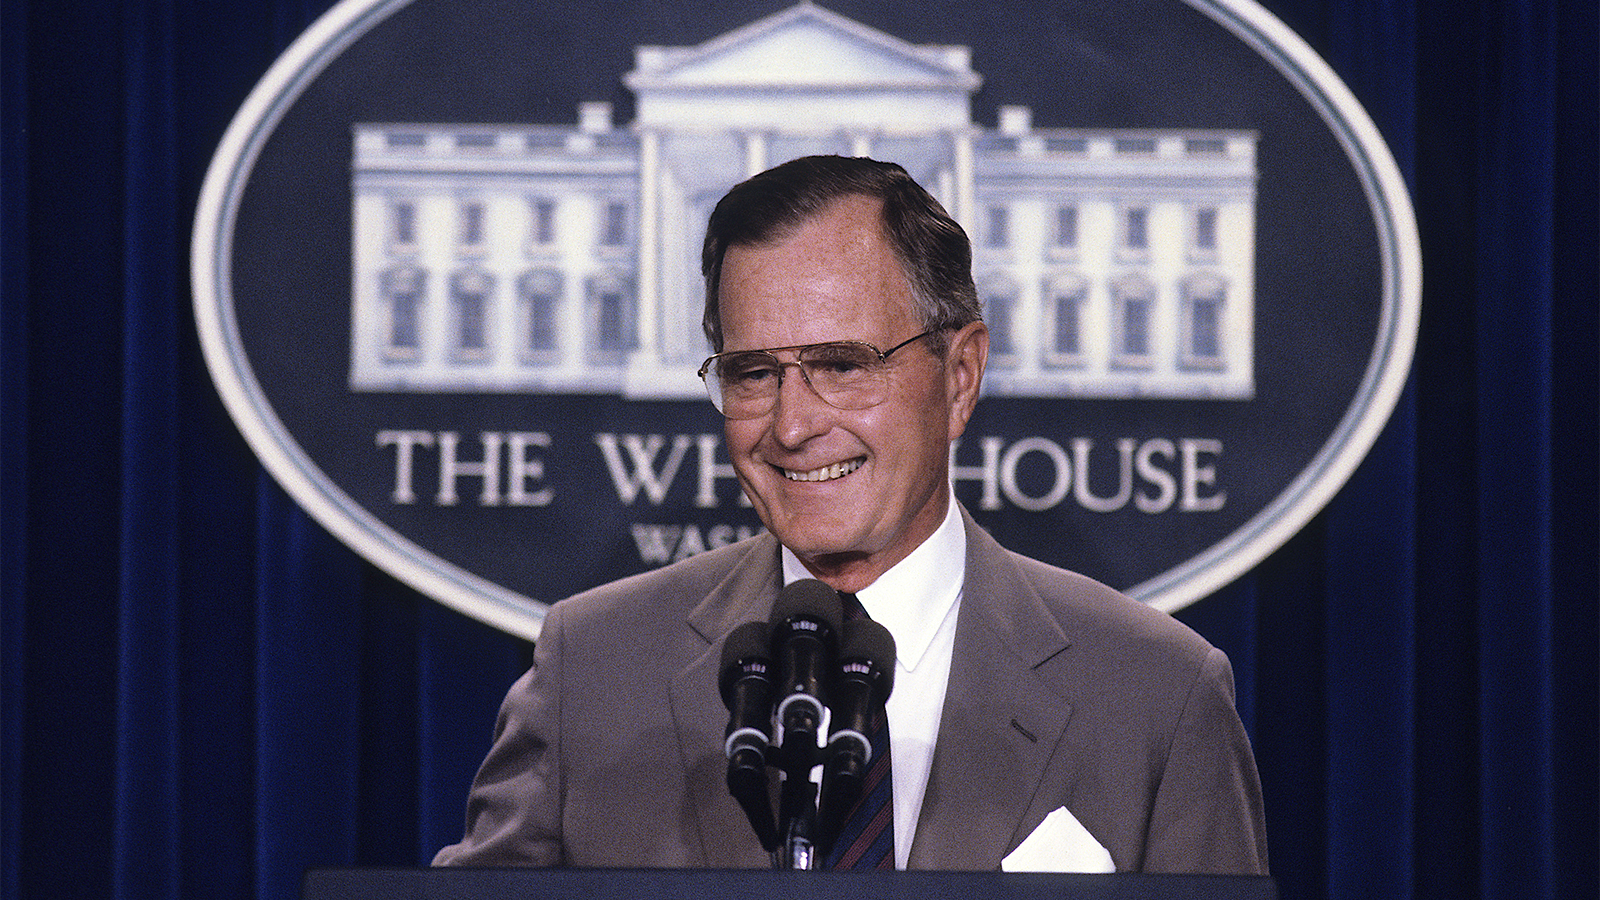 President George H.W. Bush responds to questions during a news conference at the White House in 1990. Photo by Mark Reinstein/MediaPunch /IPX